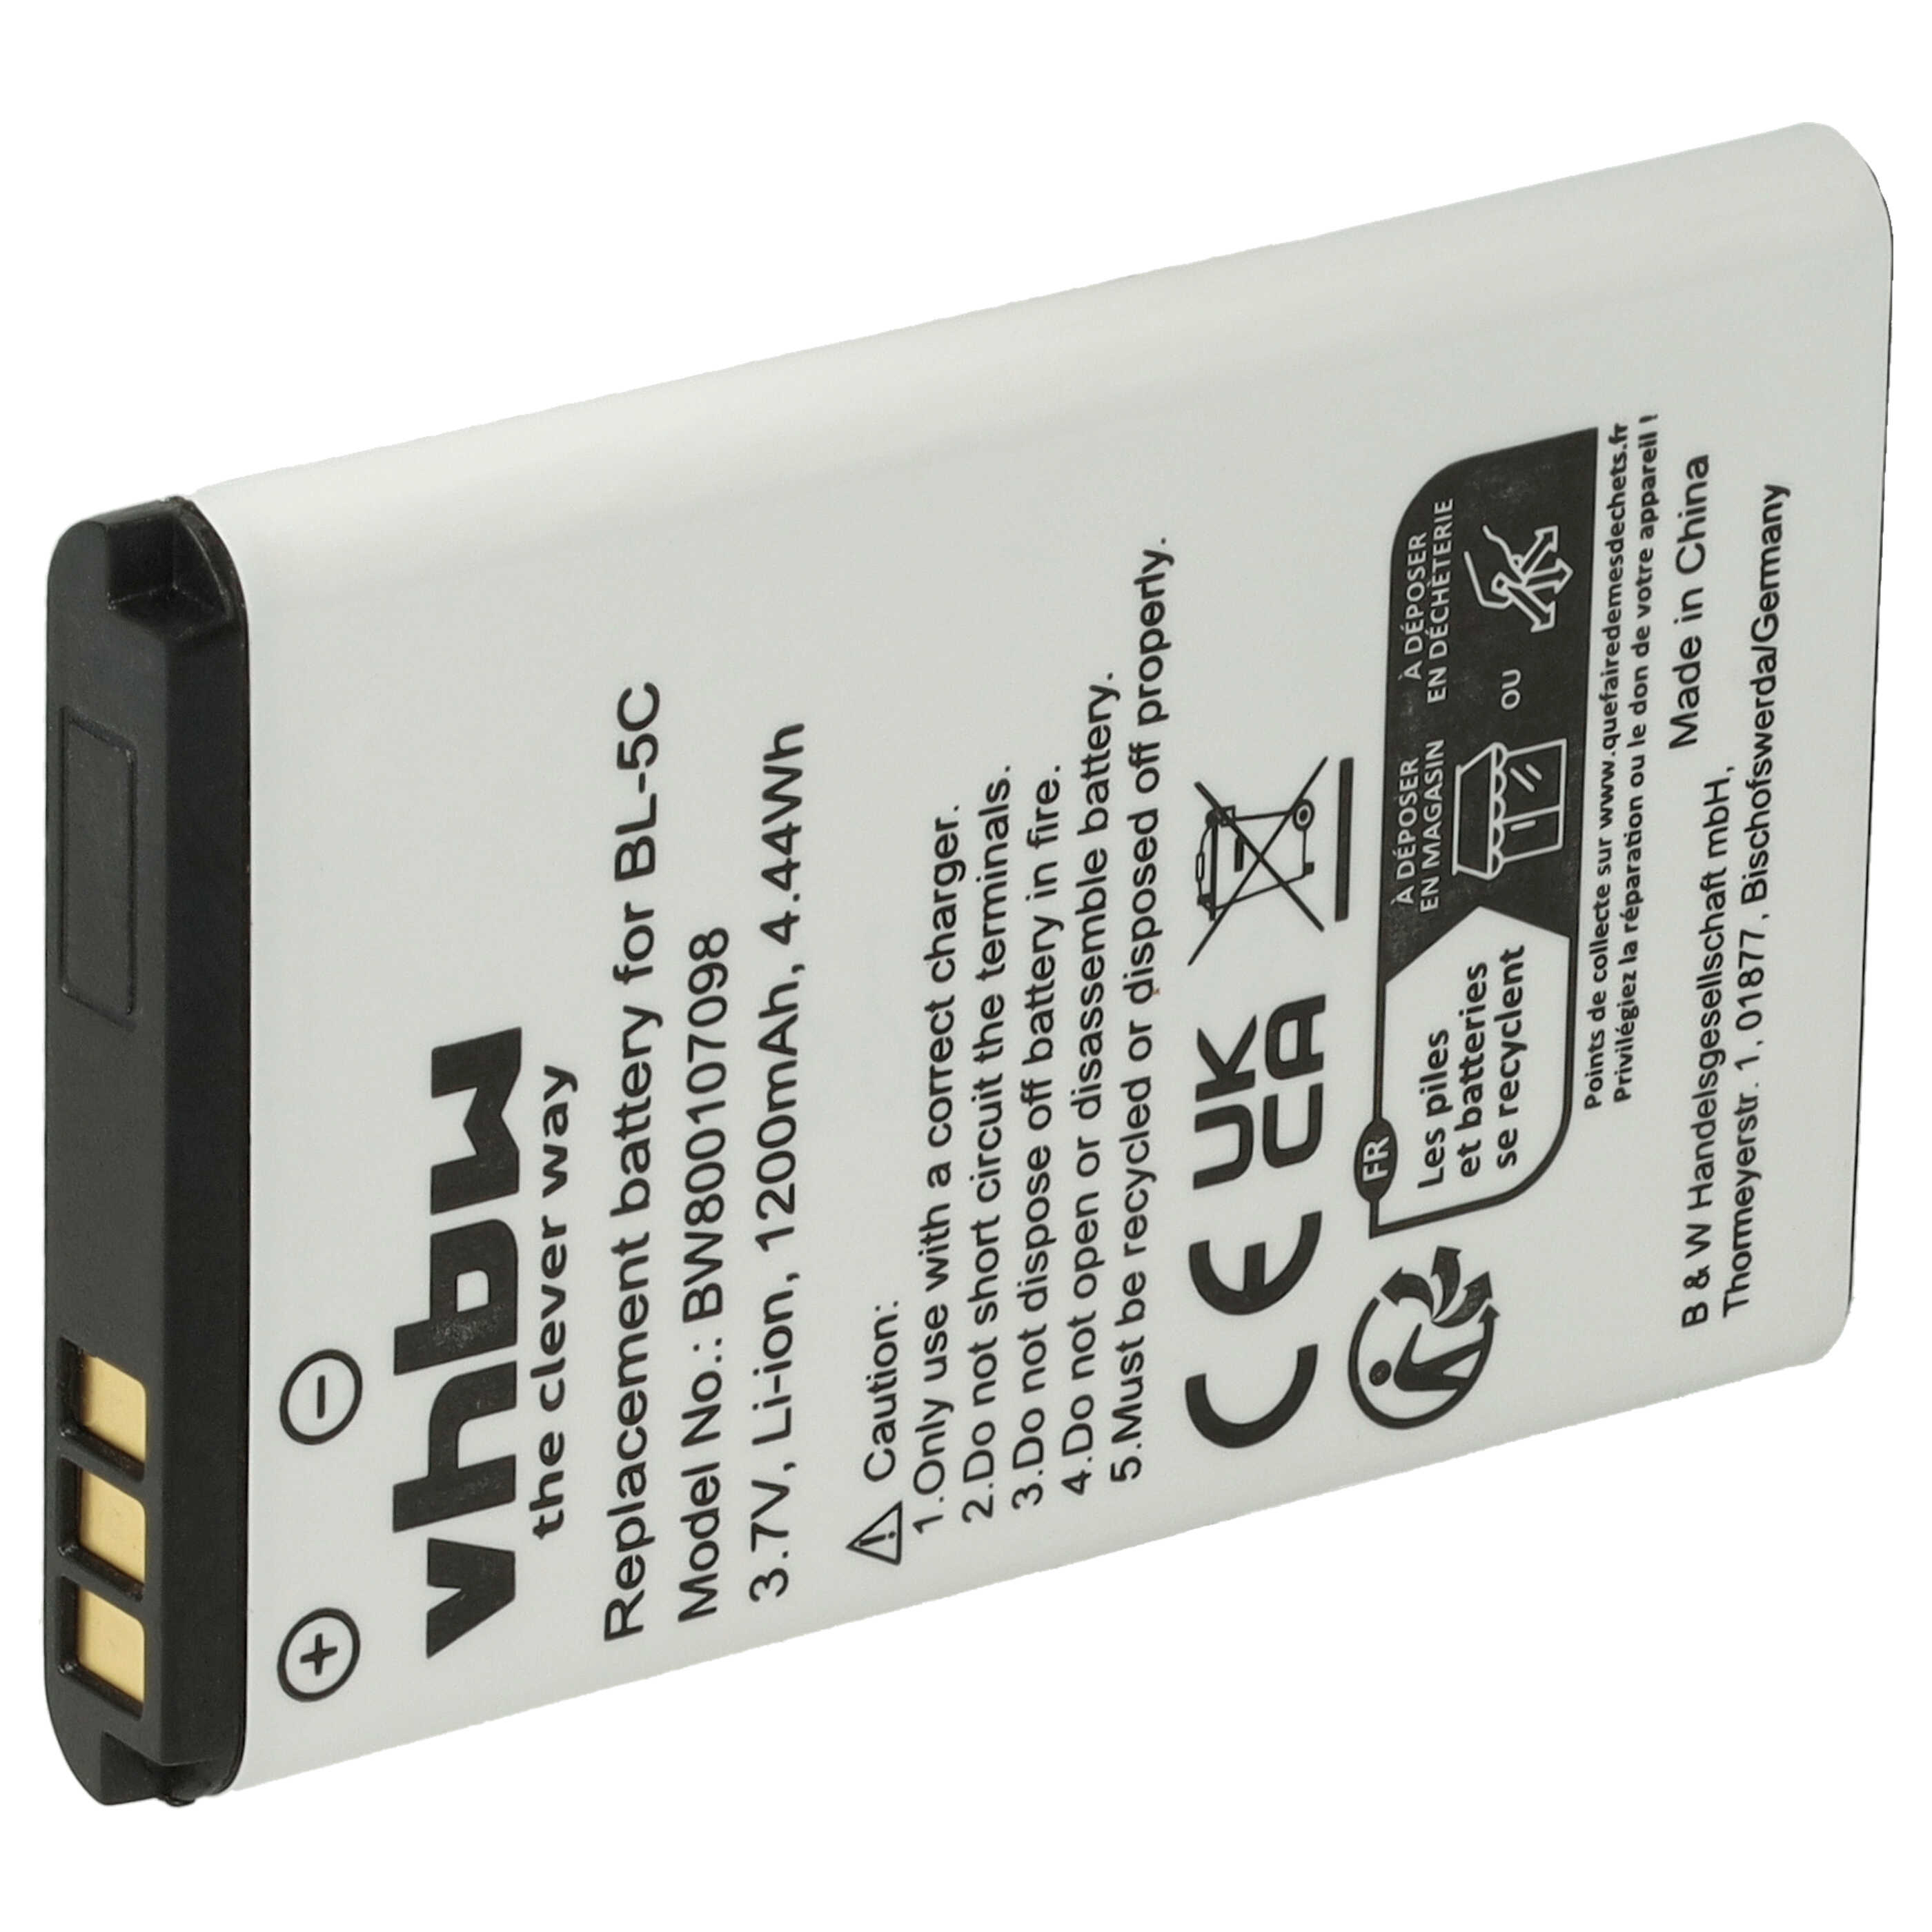 Mobile Phone Battery Replacement for MP-S-A1, RCB215, BS-16 - 1200mAh 3.7V Li-Ion